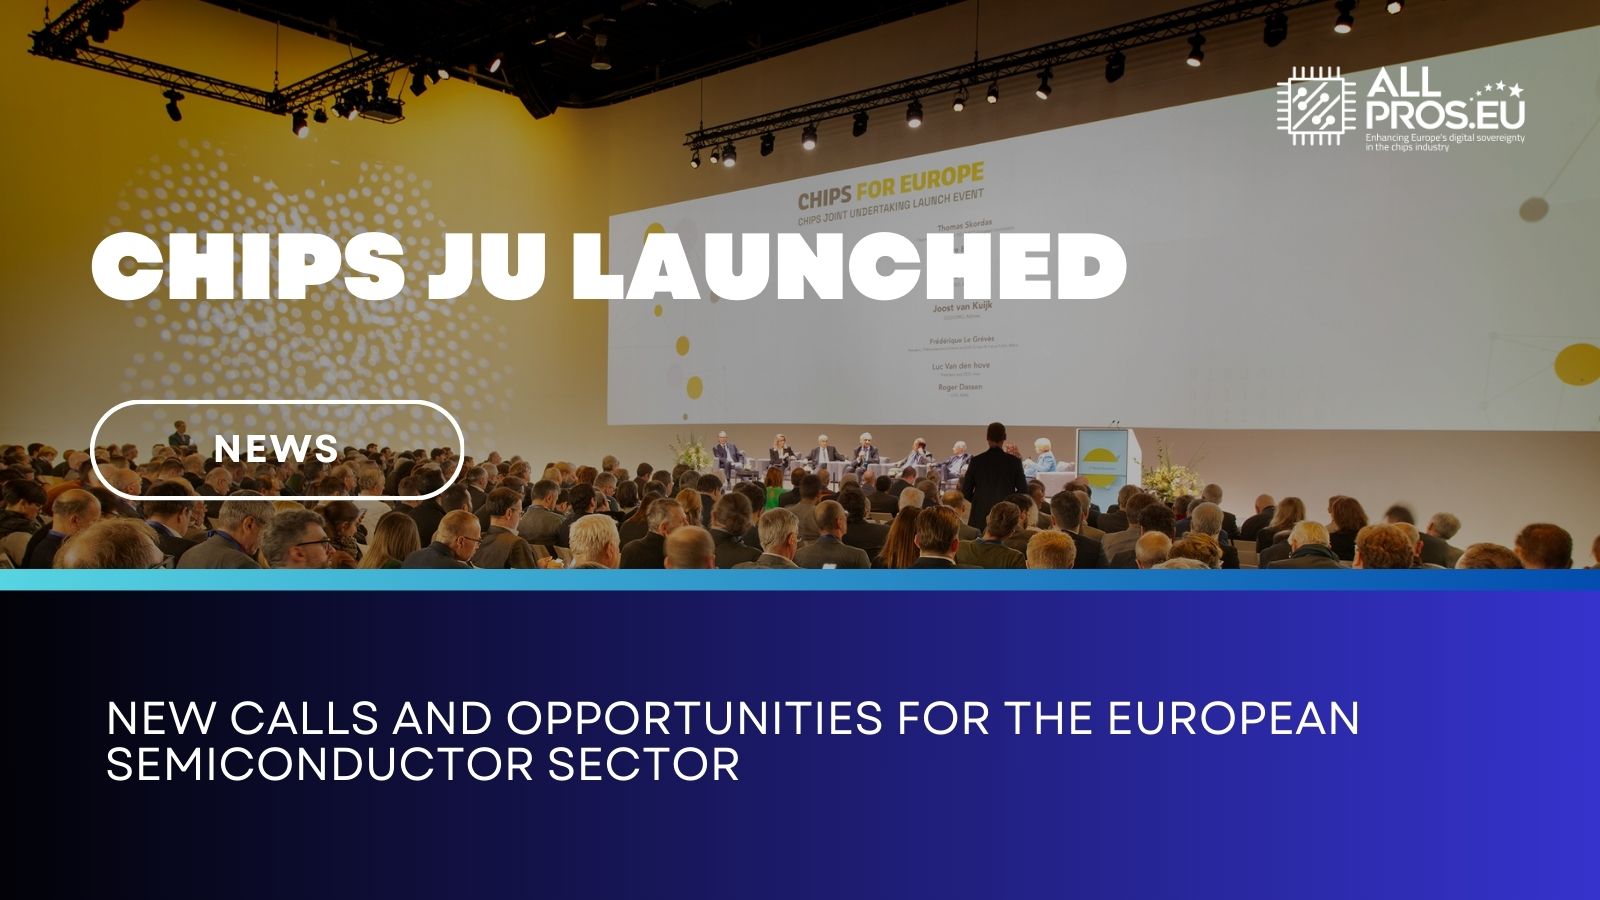 Chips JU launched: New calls and opportunities for the European Semiconductor sector